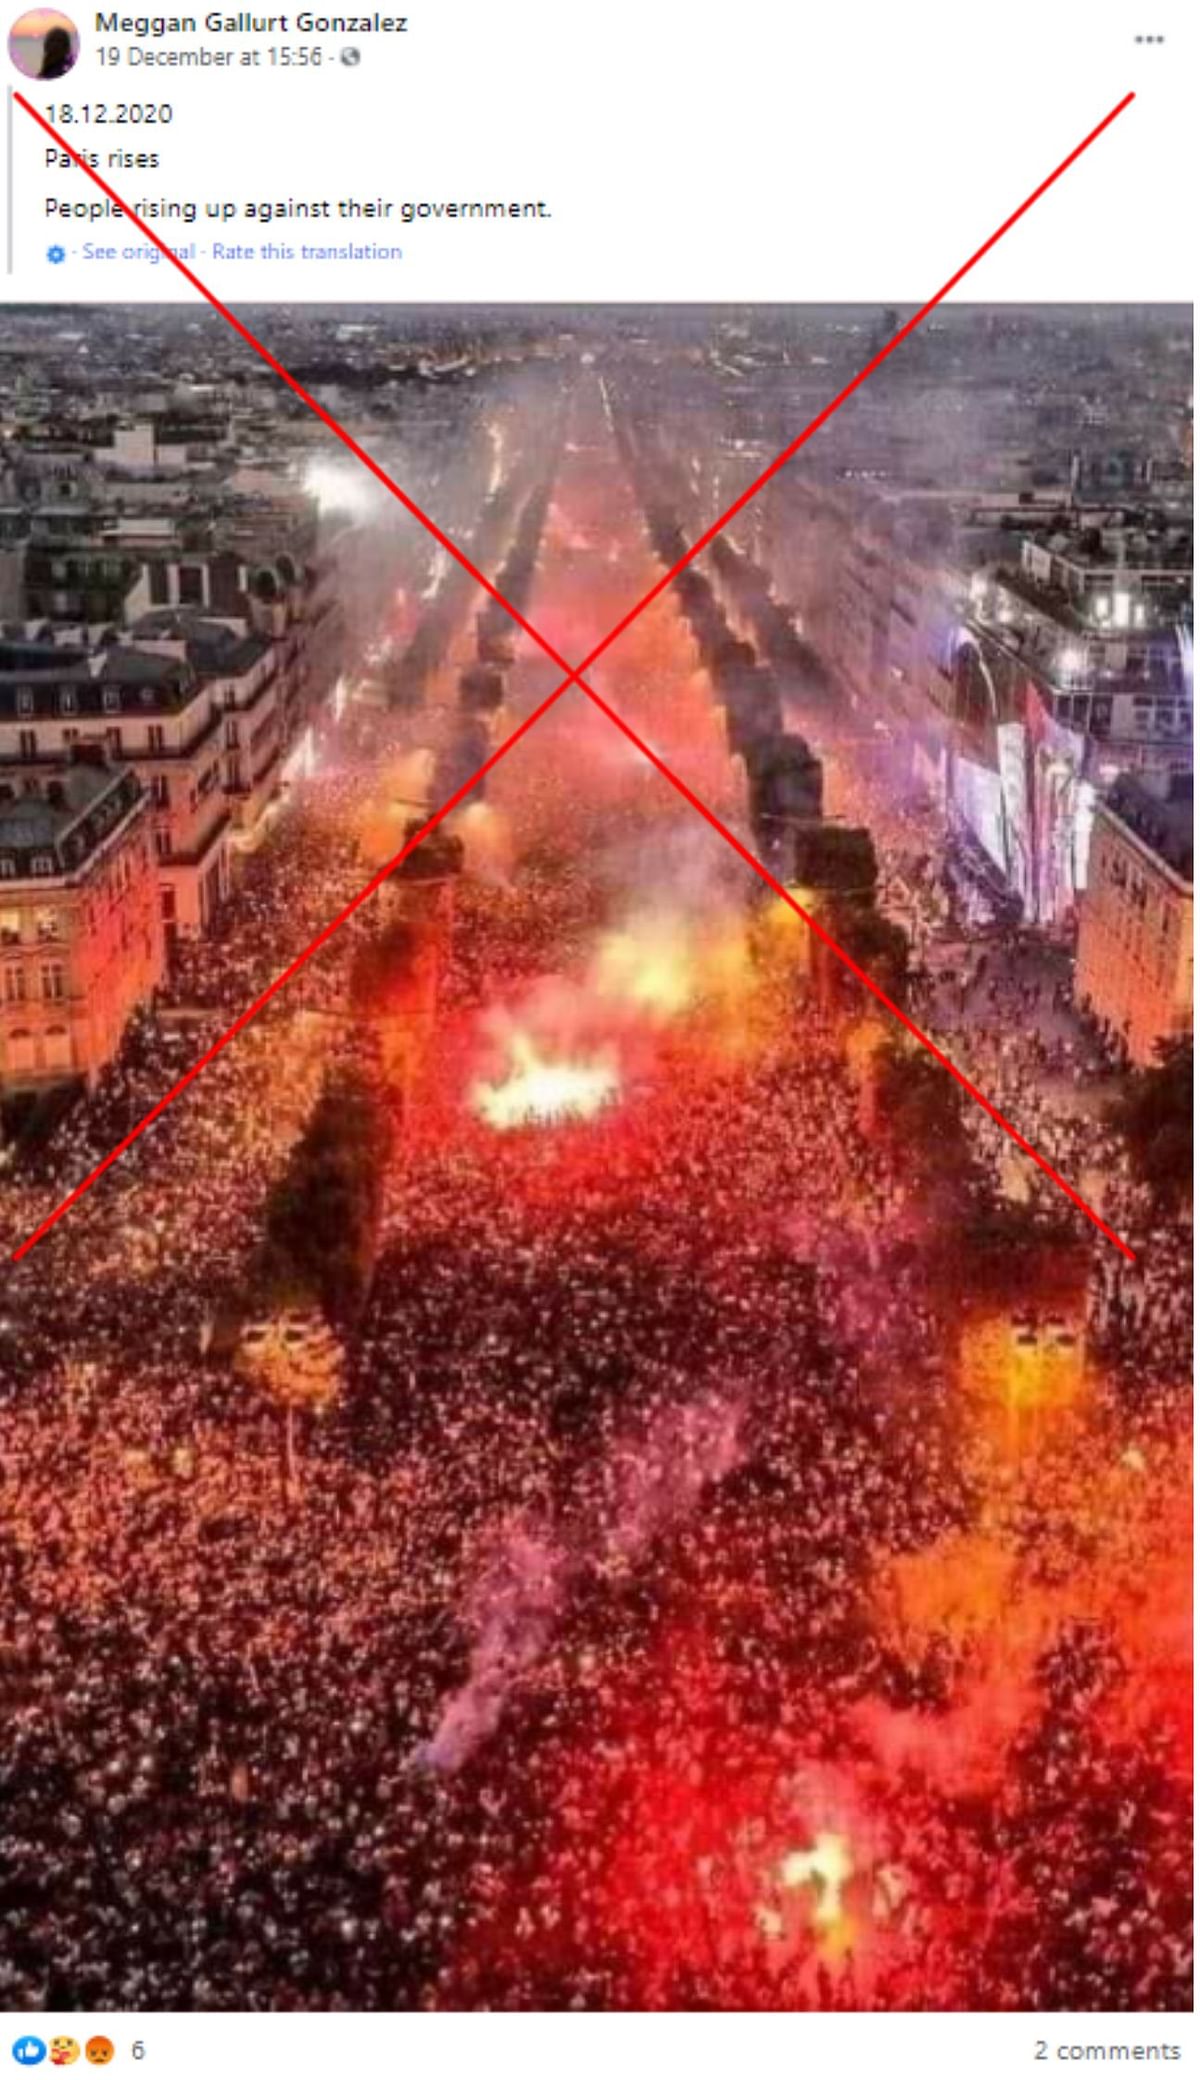 The image is actually of France celebrating its win against Croatia in the Russia 2018 FIFA World Cup.